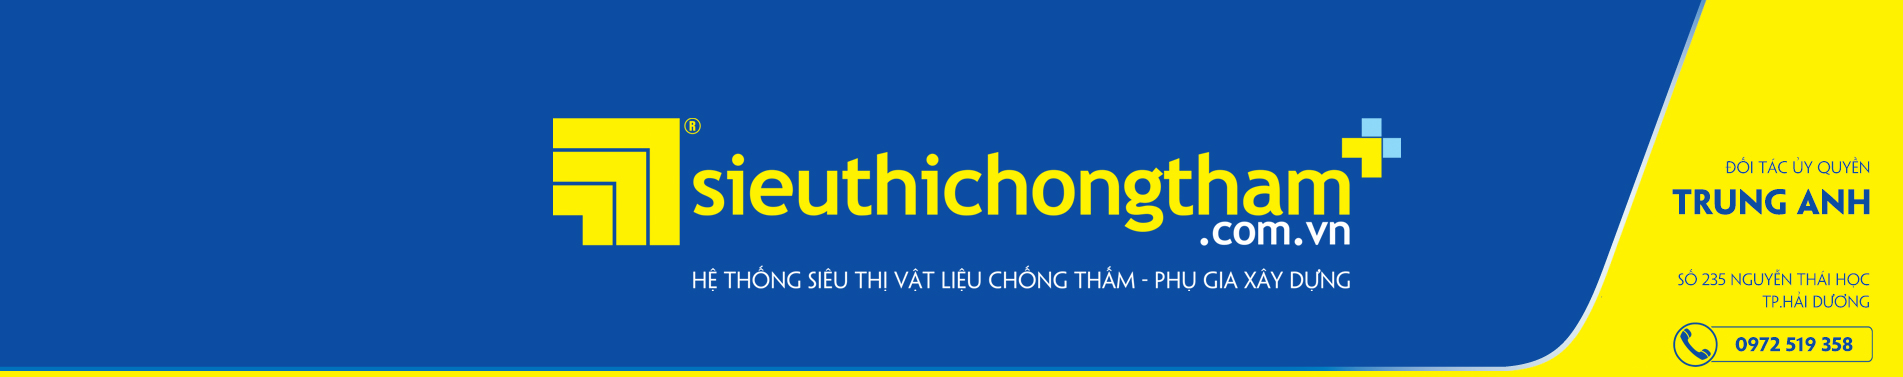 Trung Anh TP Hai Duong banner